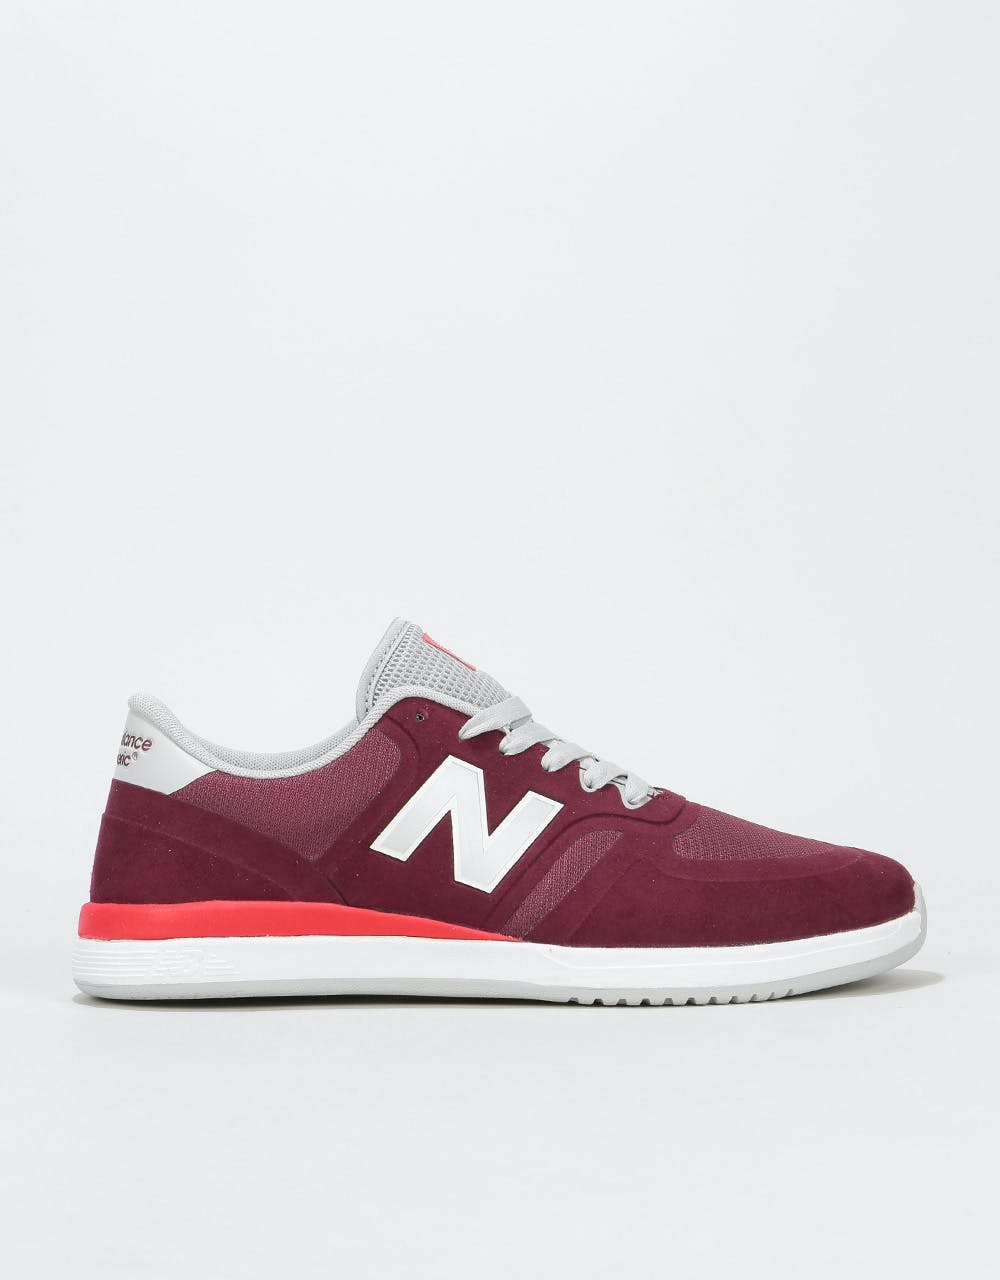 New Balance Numeric Henry 420 Skate Shoes - Burgundy/Red